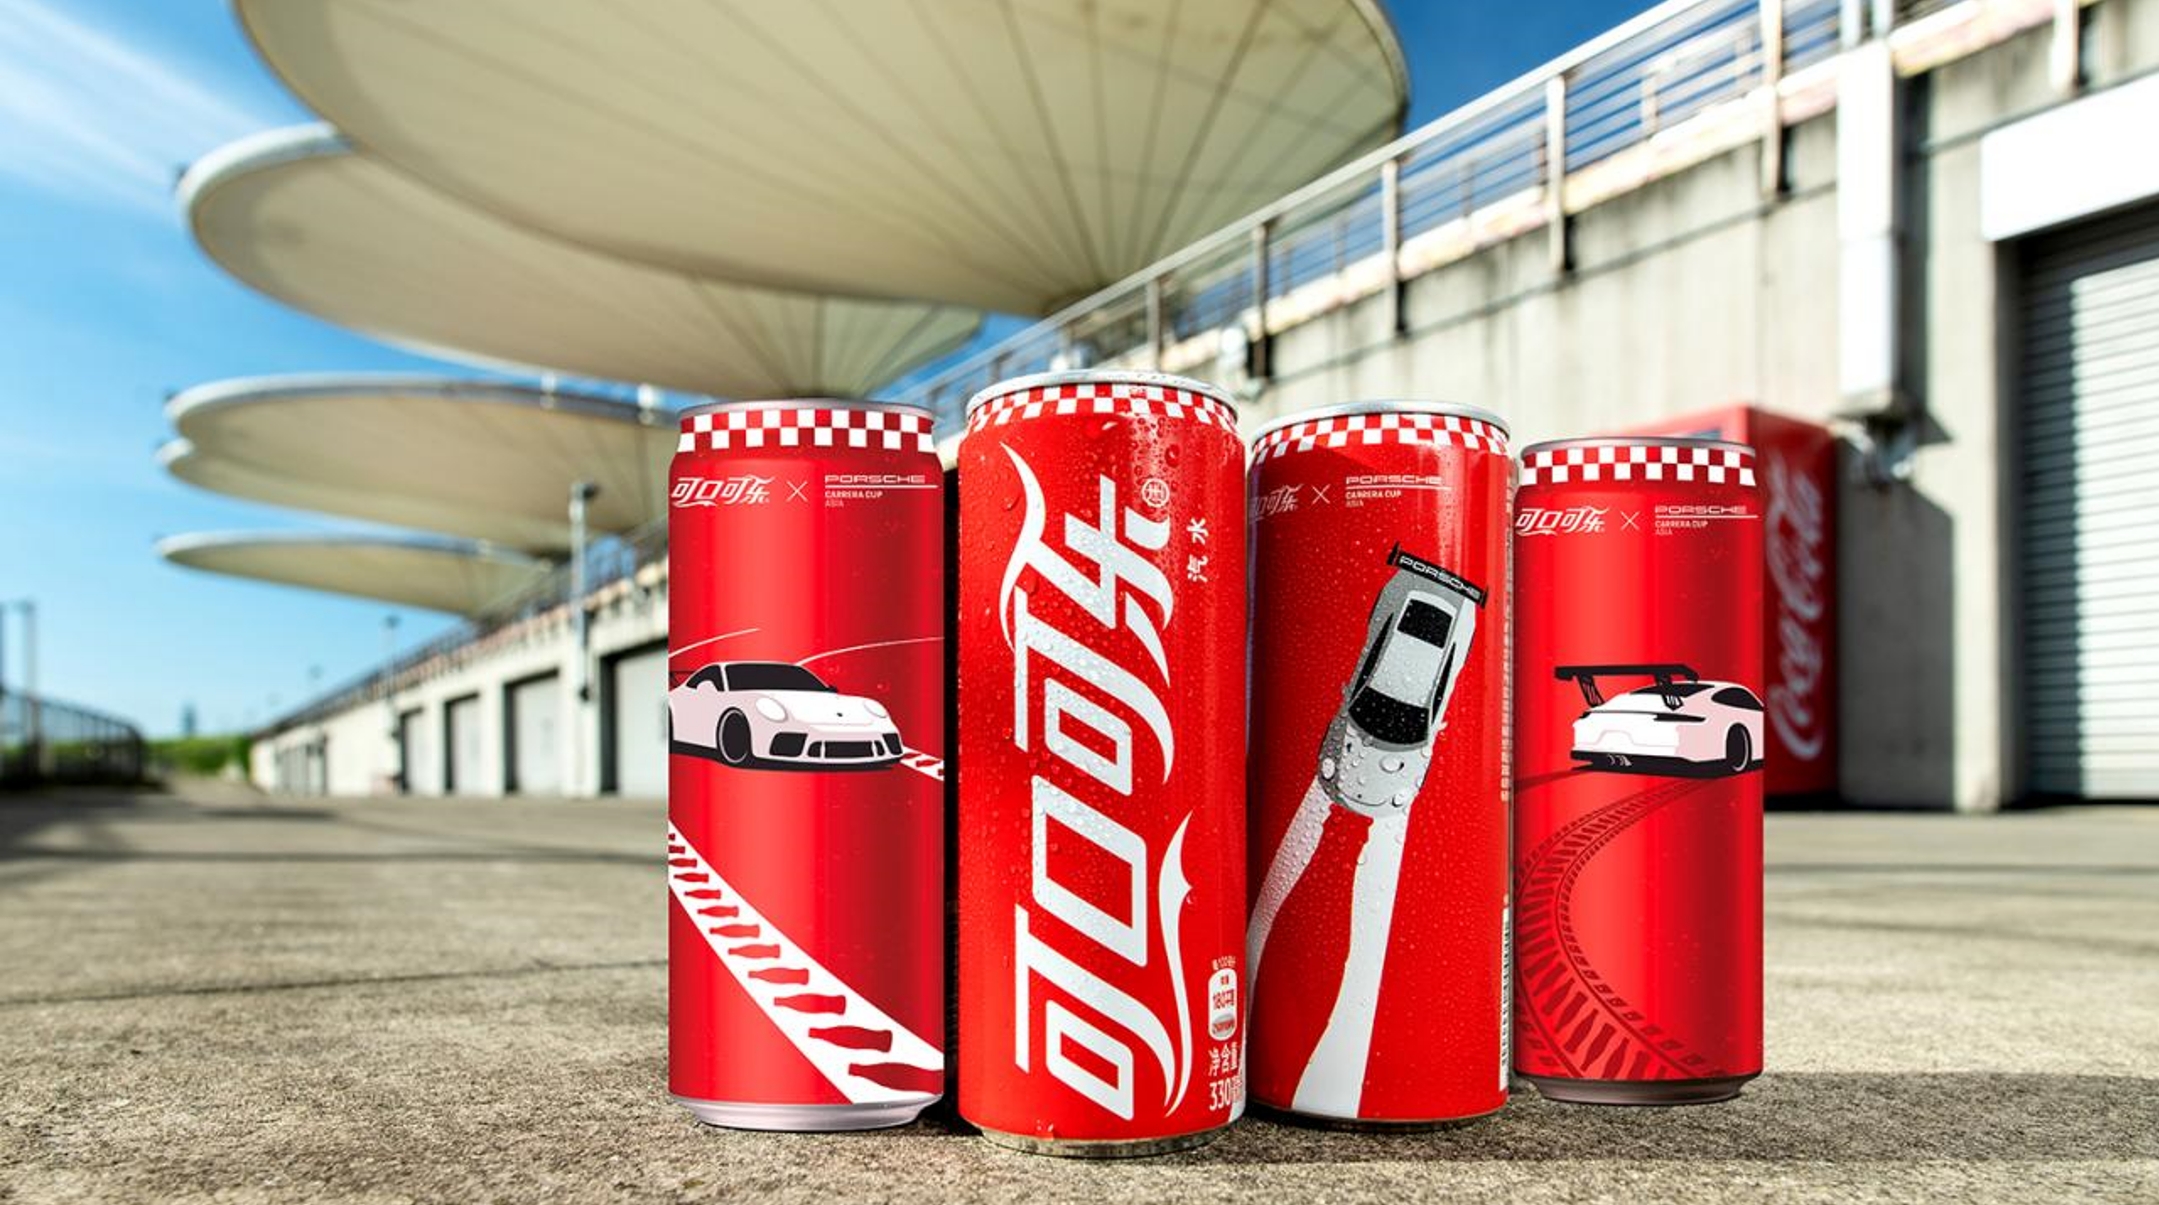 Coca-Cola x Porsche Carrera Cup: Co-branding Strategy and Packaging Design